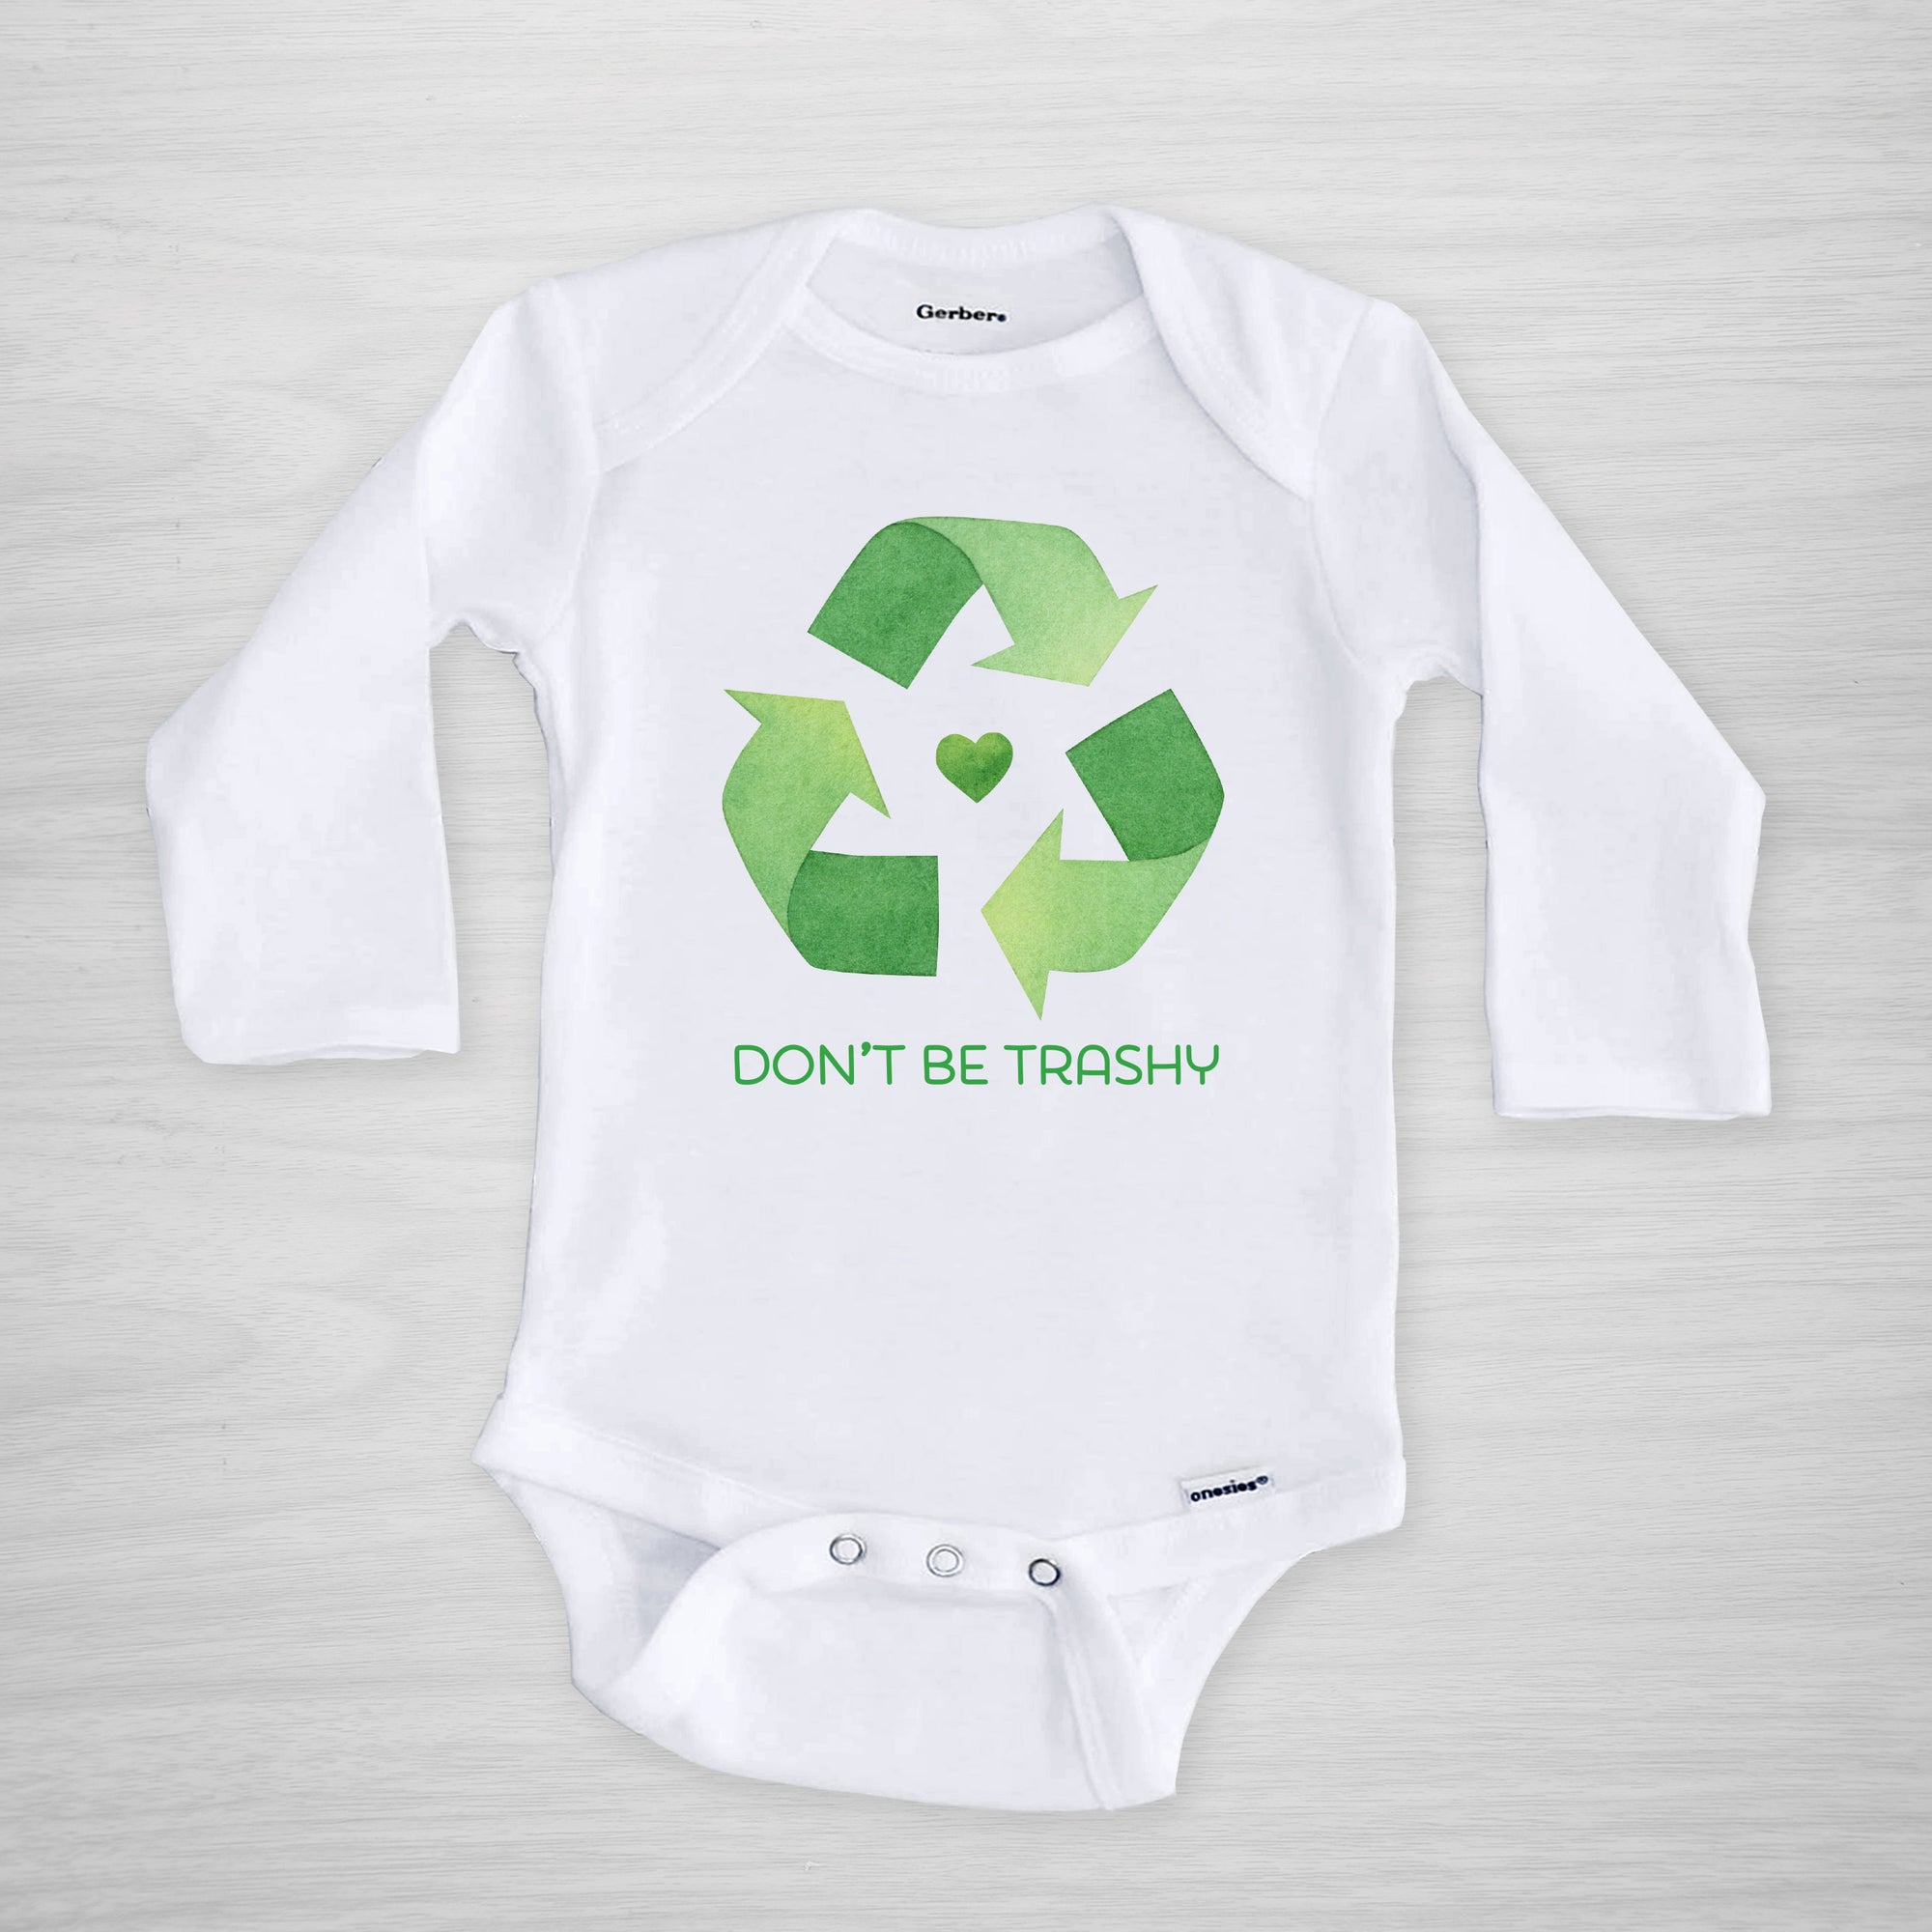 Earth Day Onesie "Don't be Trashy" Recycling Onesie, short sleeved